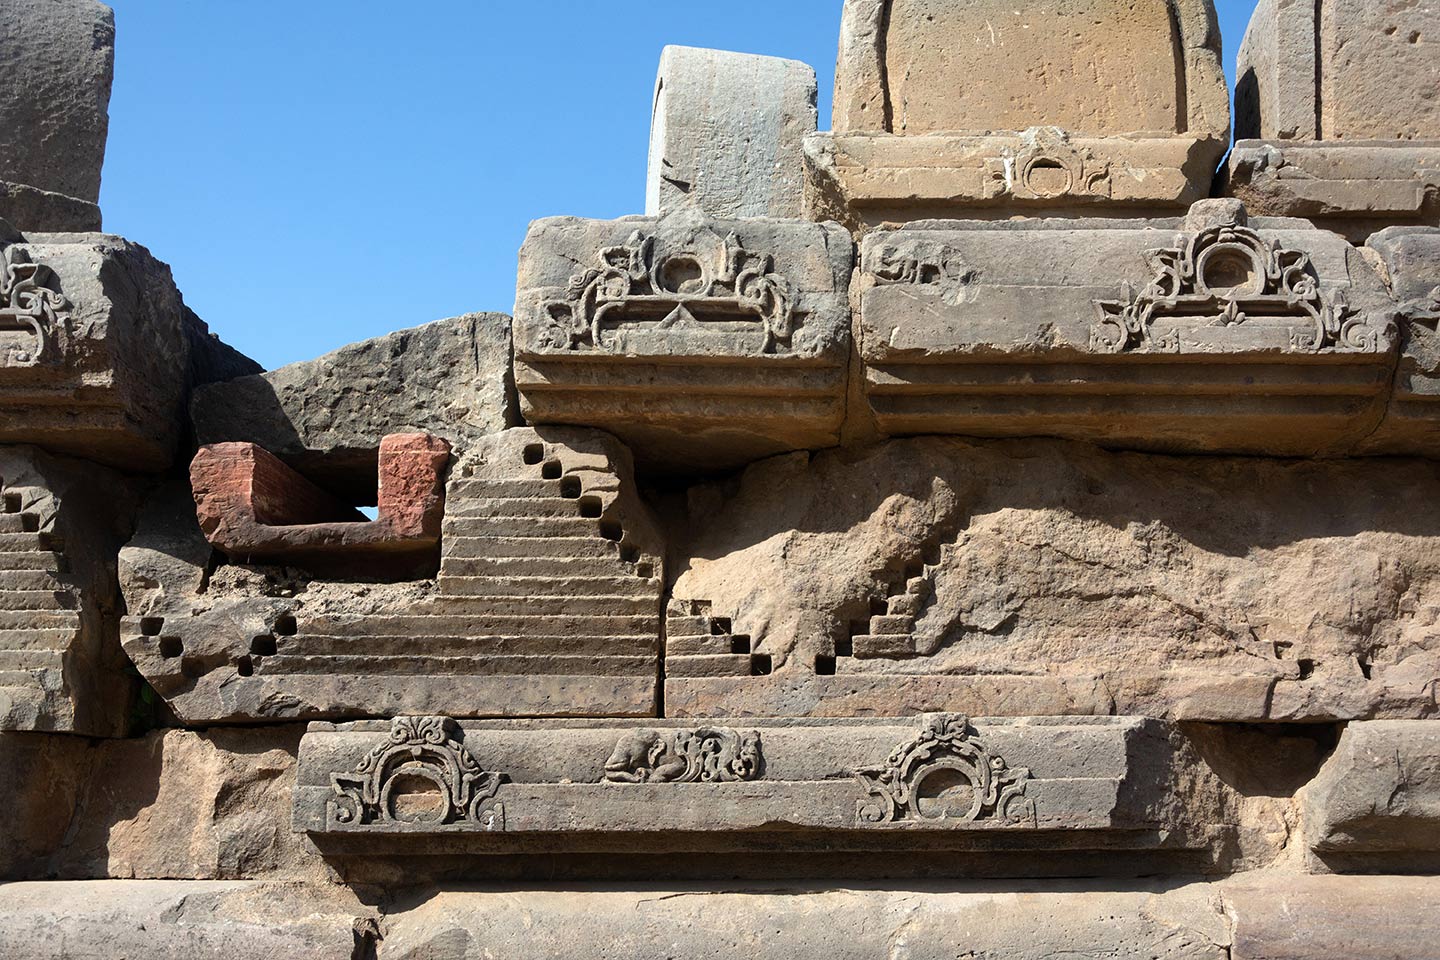 Relief carvings of geometric, flora and fauna motifs feature all around the adhisthana. A pranala (water spout) for drainage is seen on the left.